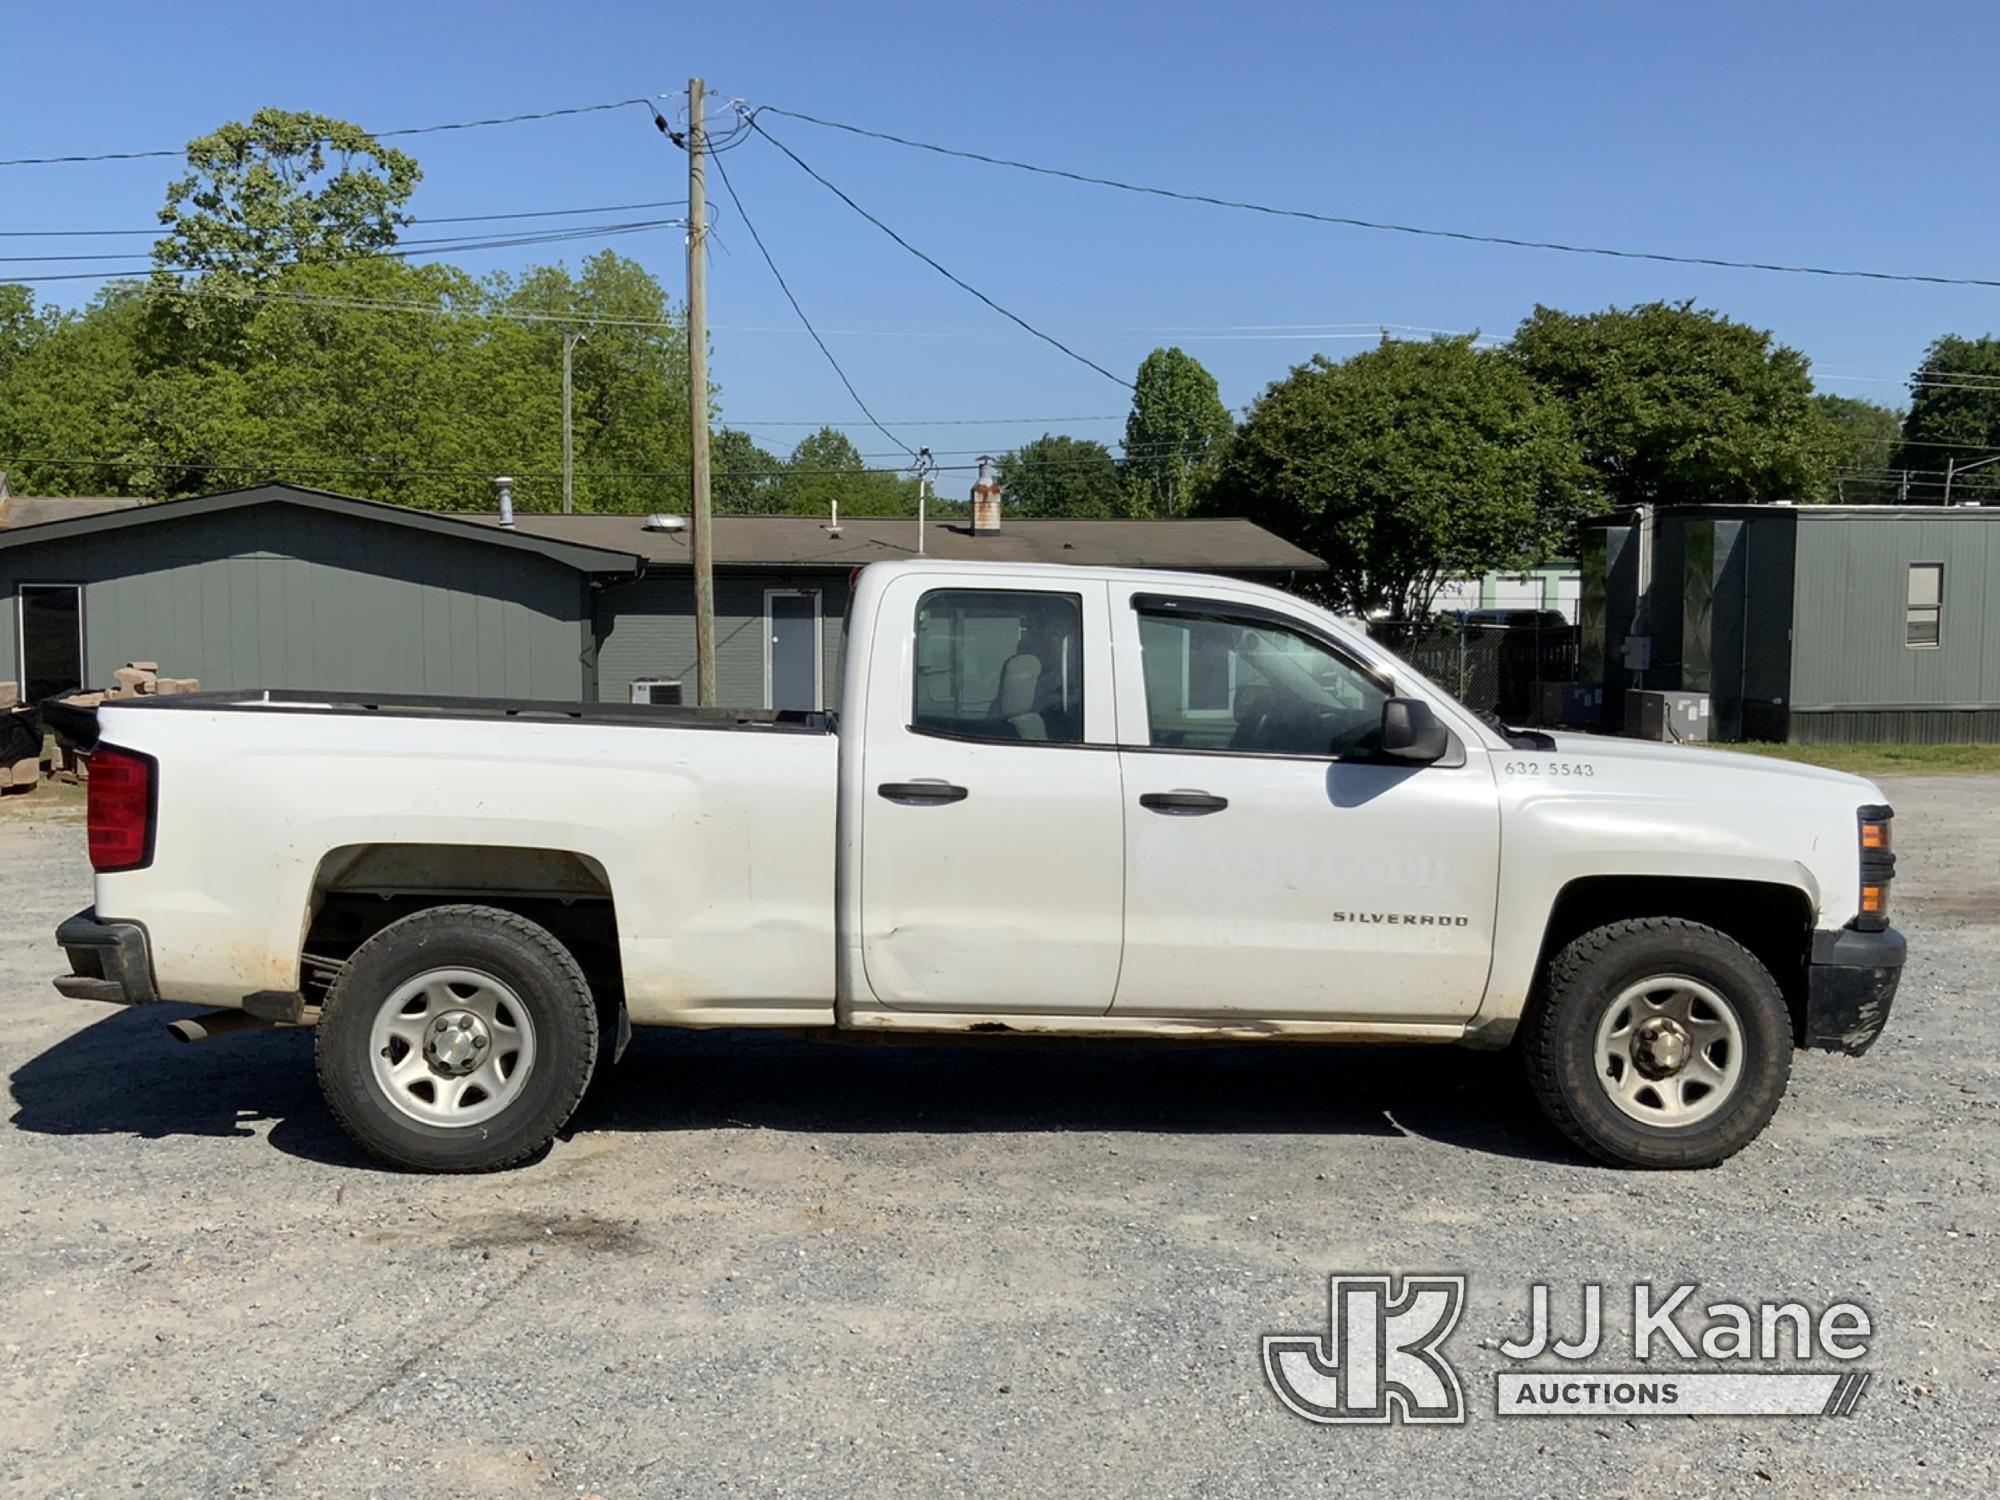 (Shelby, NC) 2015 Chevrolet Silverado 1500 4x4 Extended-Cab Pickup Truck Runs, Moves, Check Engine L